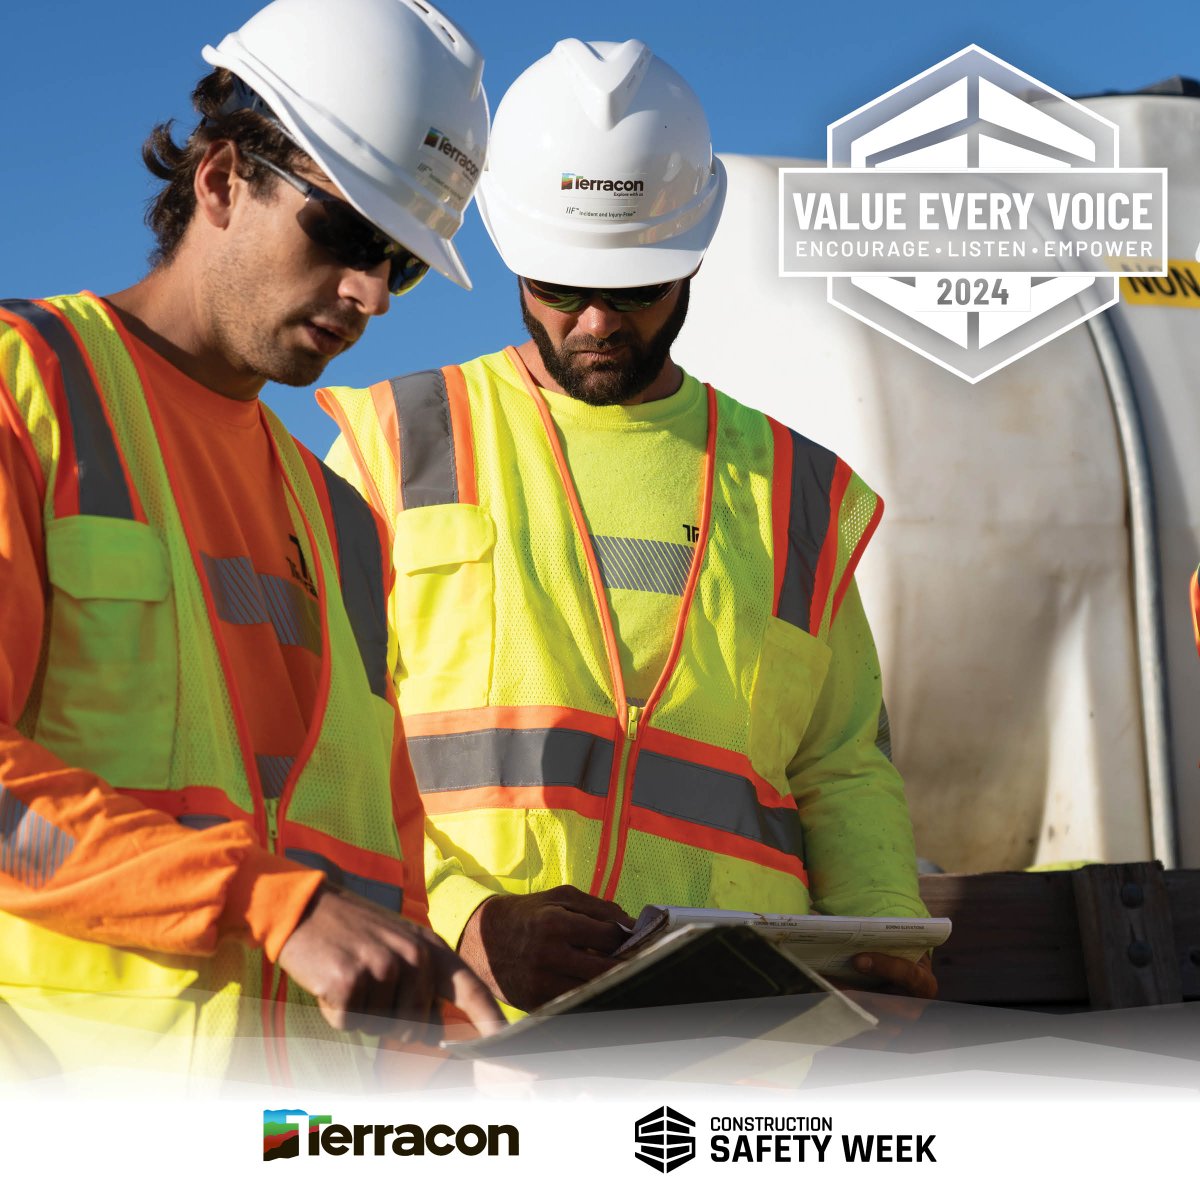 Working safely starts with feeling supported. Our “6 for 60” program connects new employees with their supervisors for regular safety coaching and check-ins in their first two months on the job. Thanks for celebrating #ConstructionSafetyWeek with us! go.terracon.com/3EgUp1t